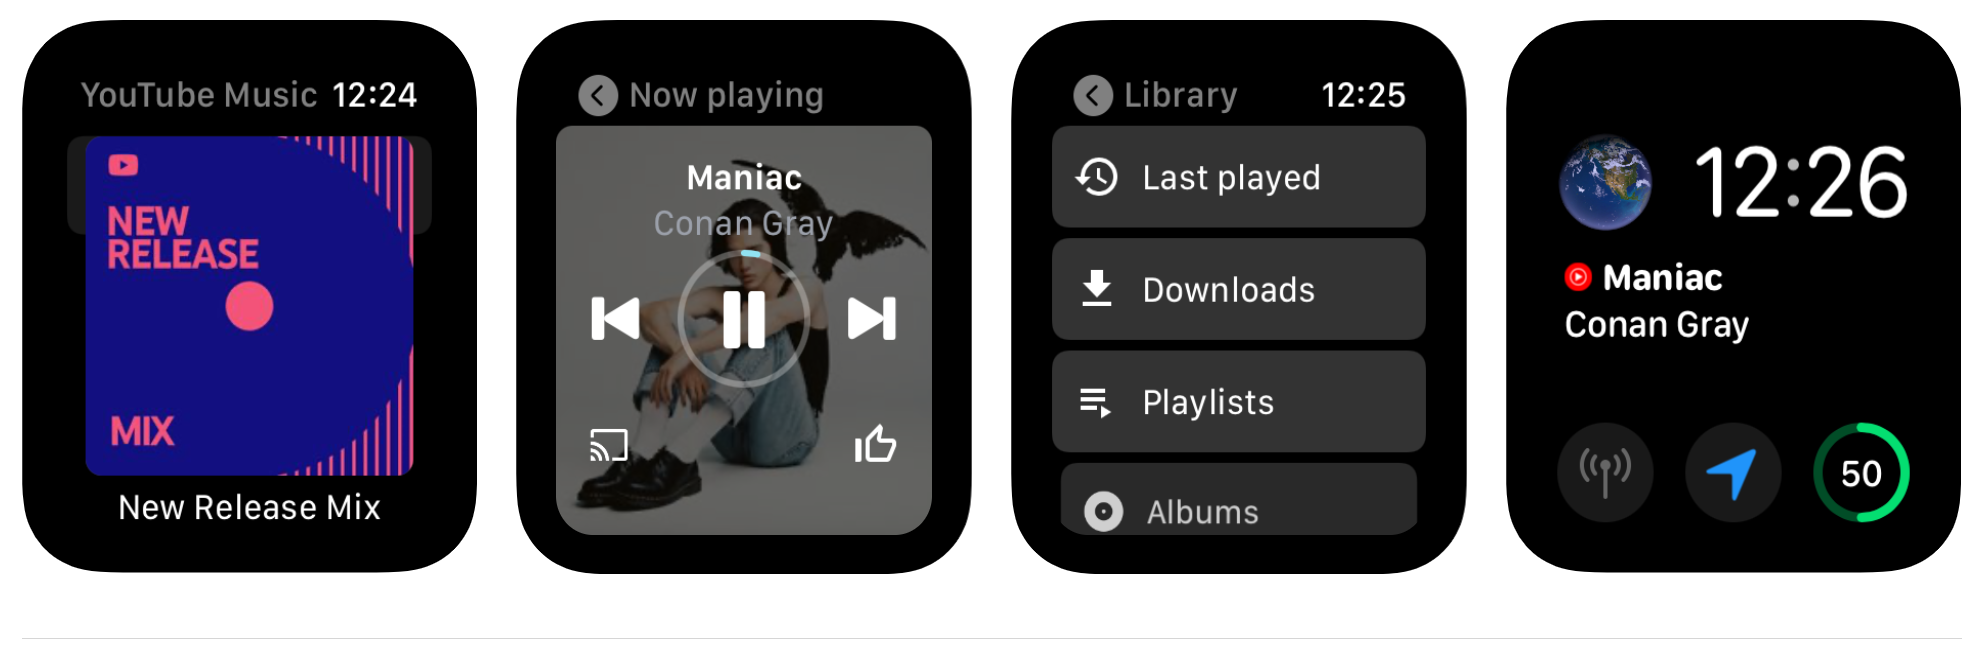 youtube-music-apple-watch.png